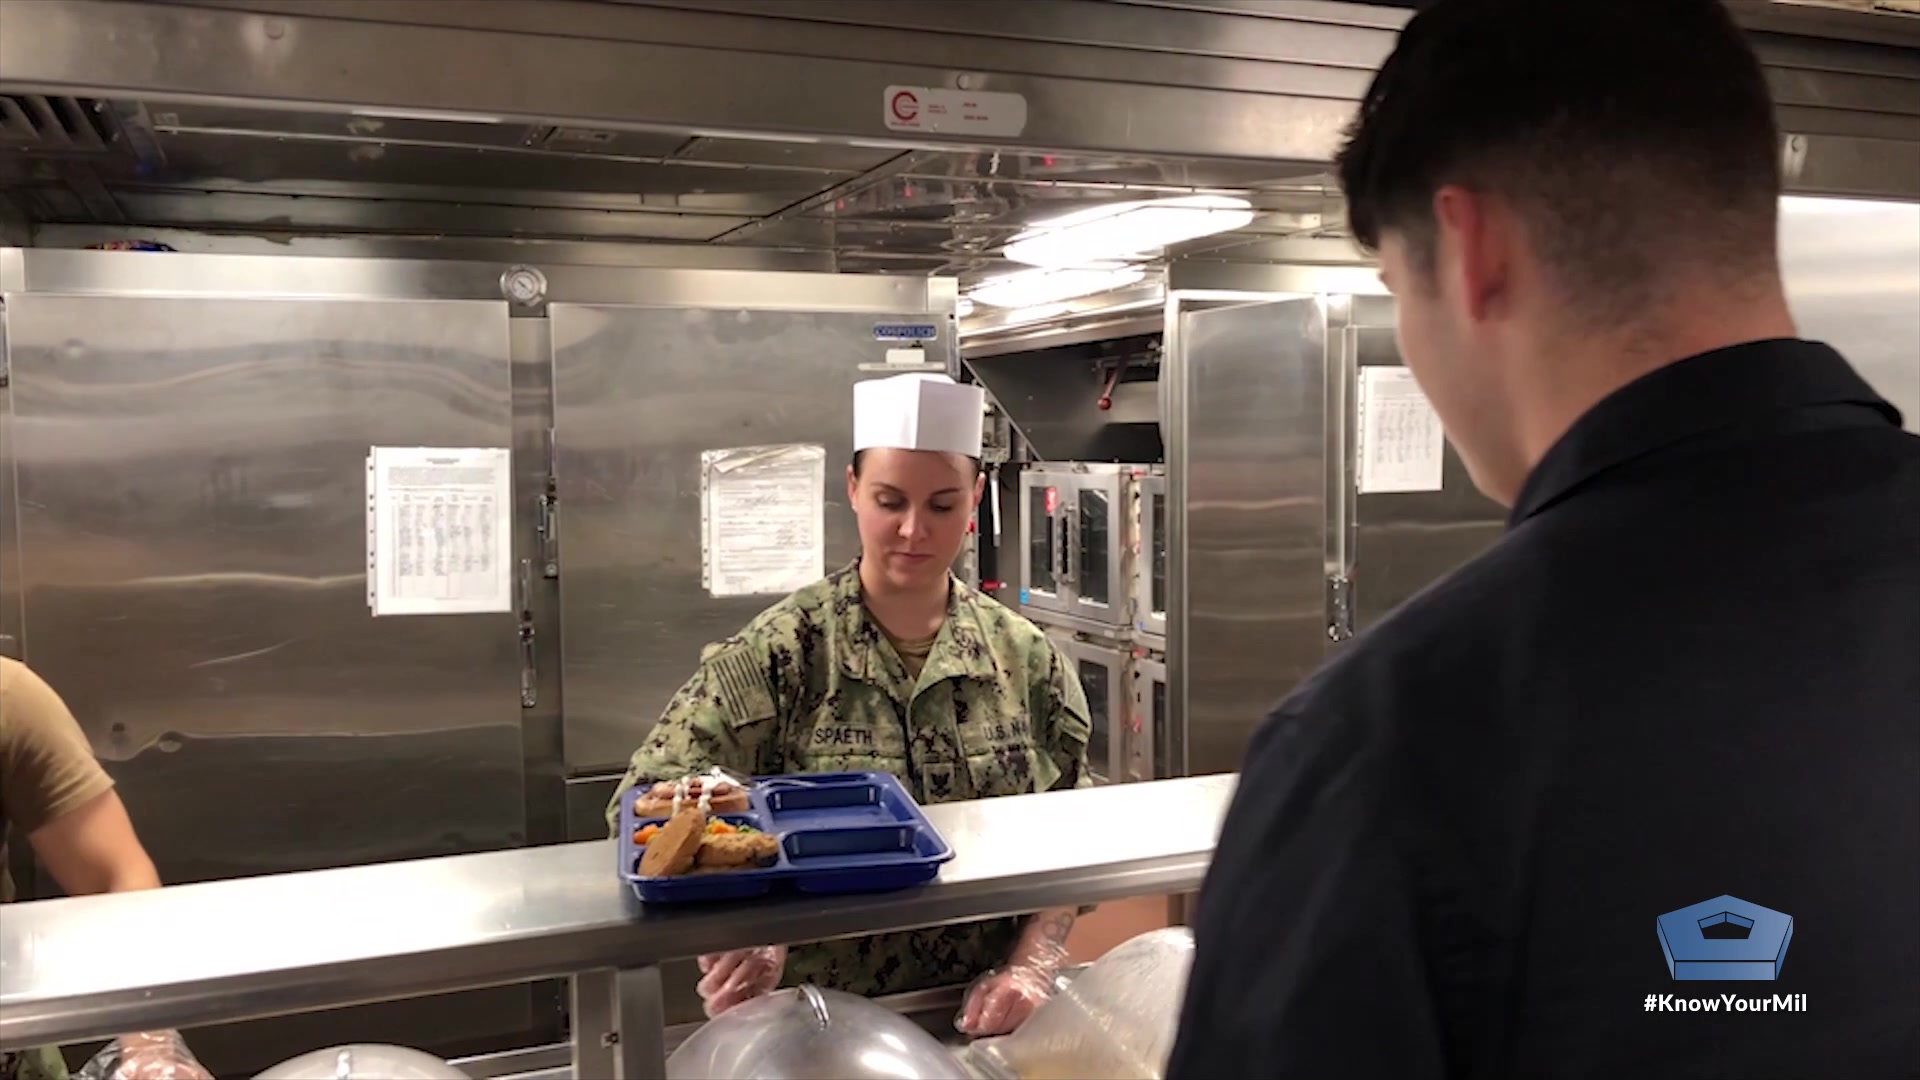 The amphibious transport dock USS New York is home to hundreds of sailors, all working hard every day to achieve their missions. The food services crewmen ensure every sailor has the fuel they need to succeed.